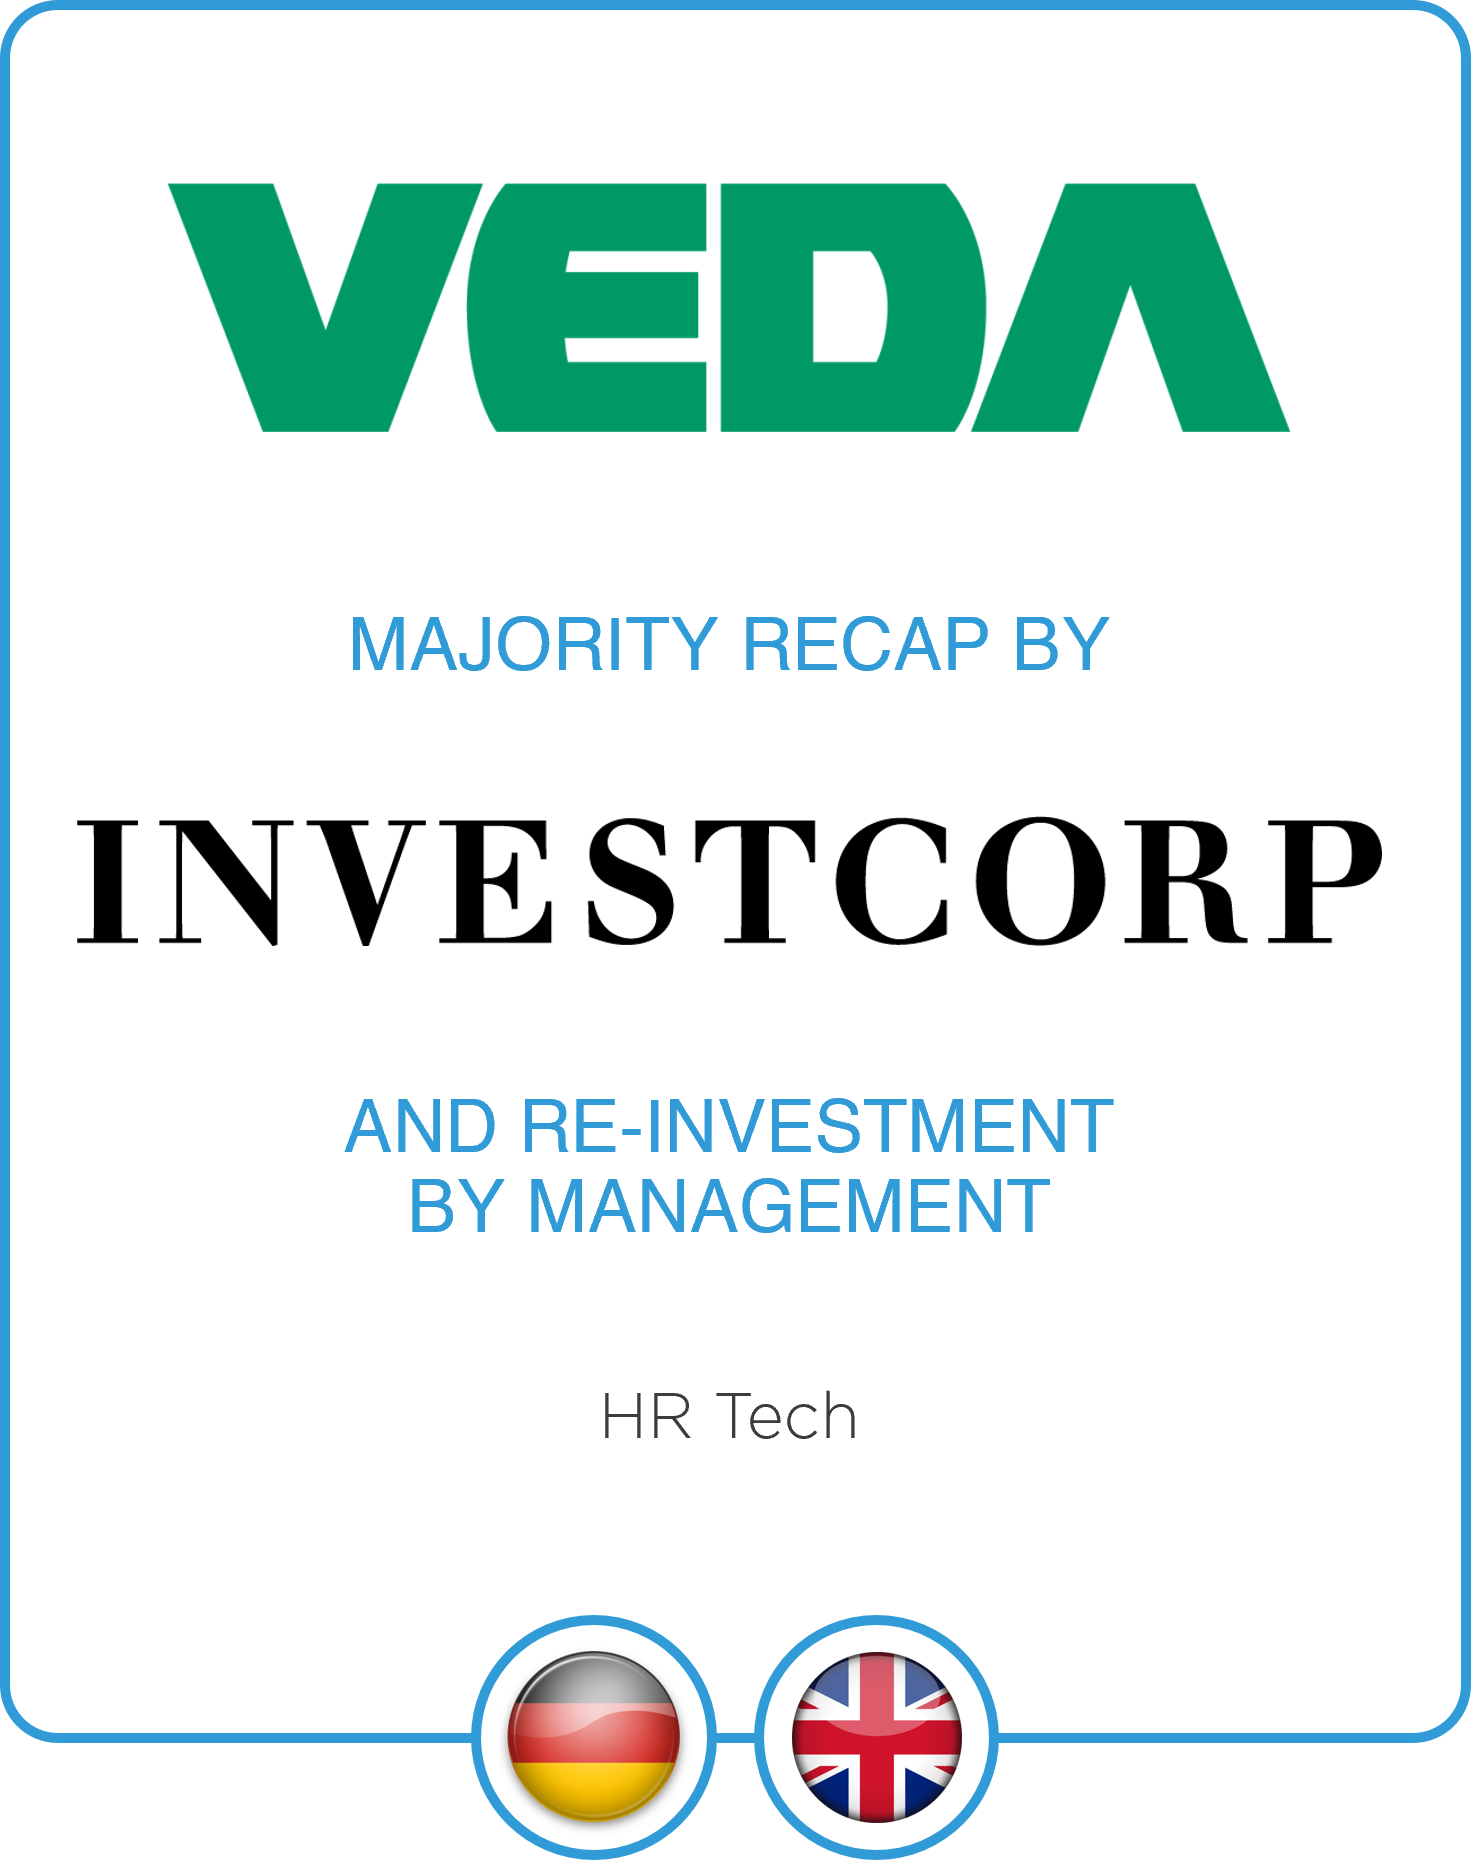 Drake Star acts as Exclusive Financial Advisor to VEDA on the Majority Recapitalization with Investcorp